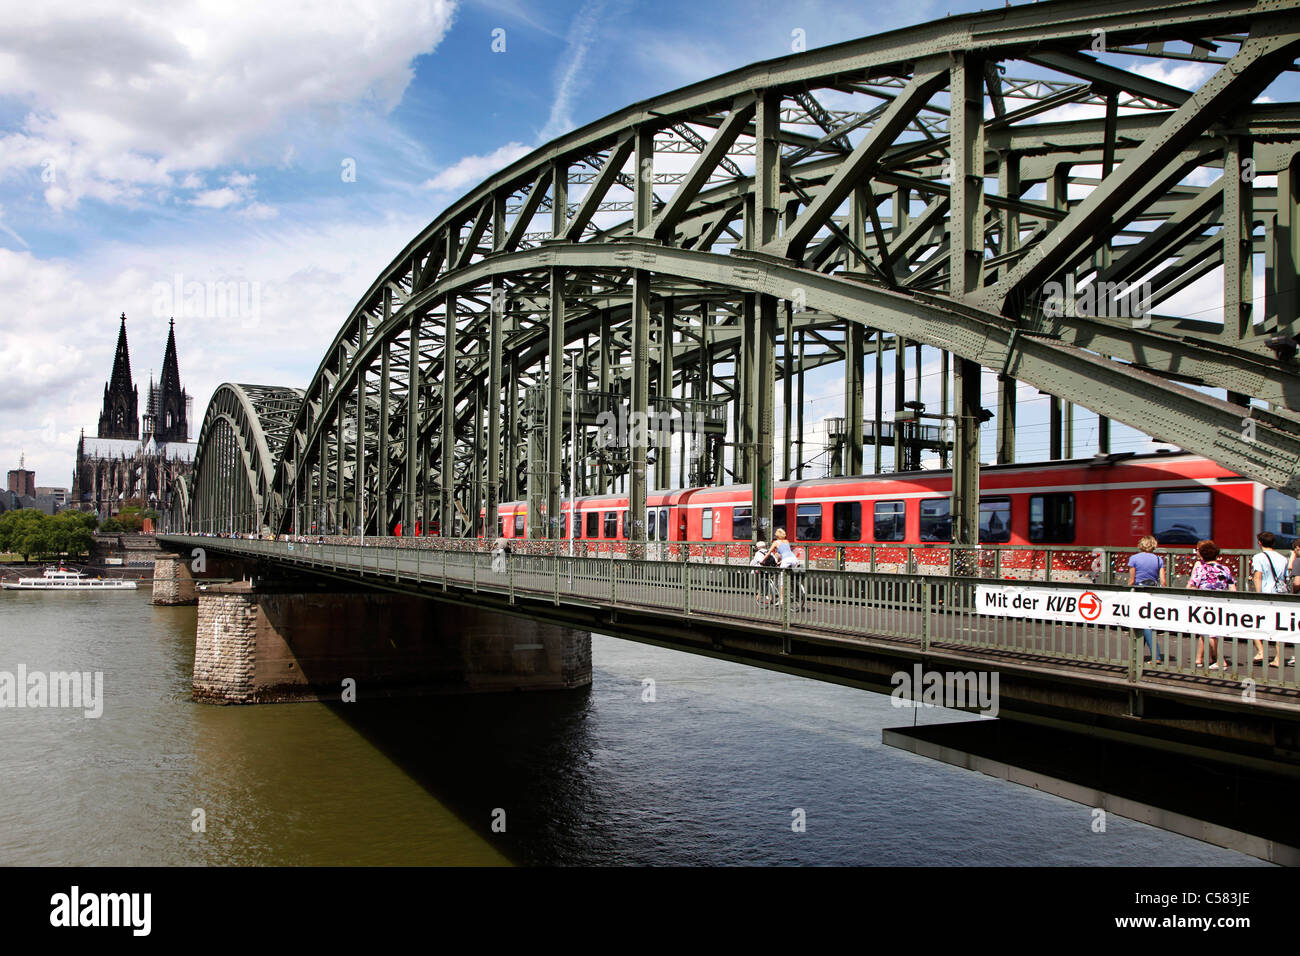 Skyline of Cologne, Germany. River Rhine, Hohenzollern railway bridge, Cologne cathedral. Stock Photo